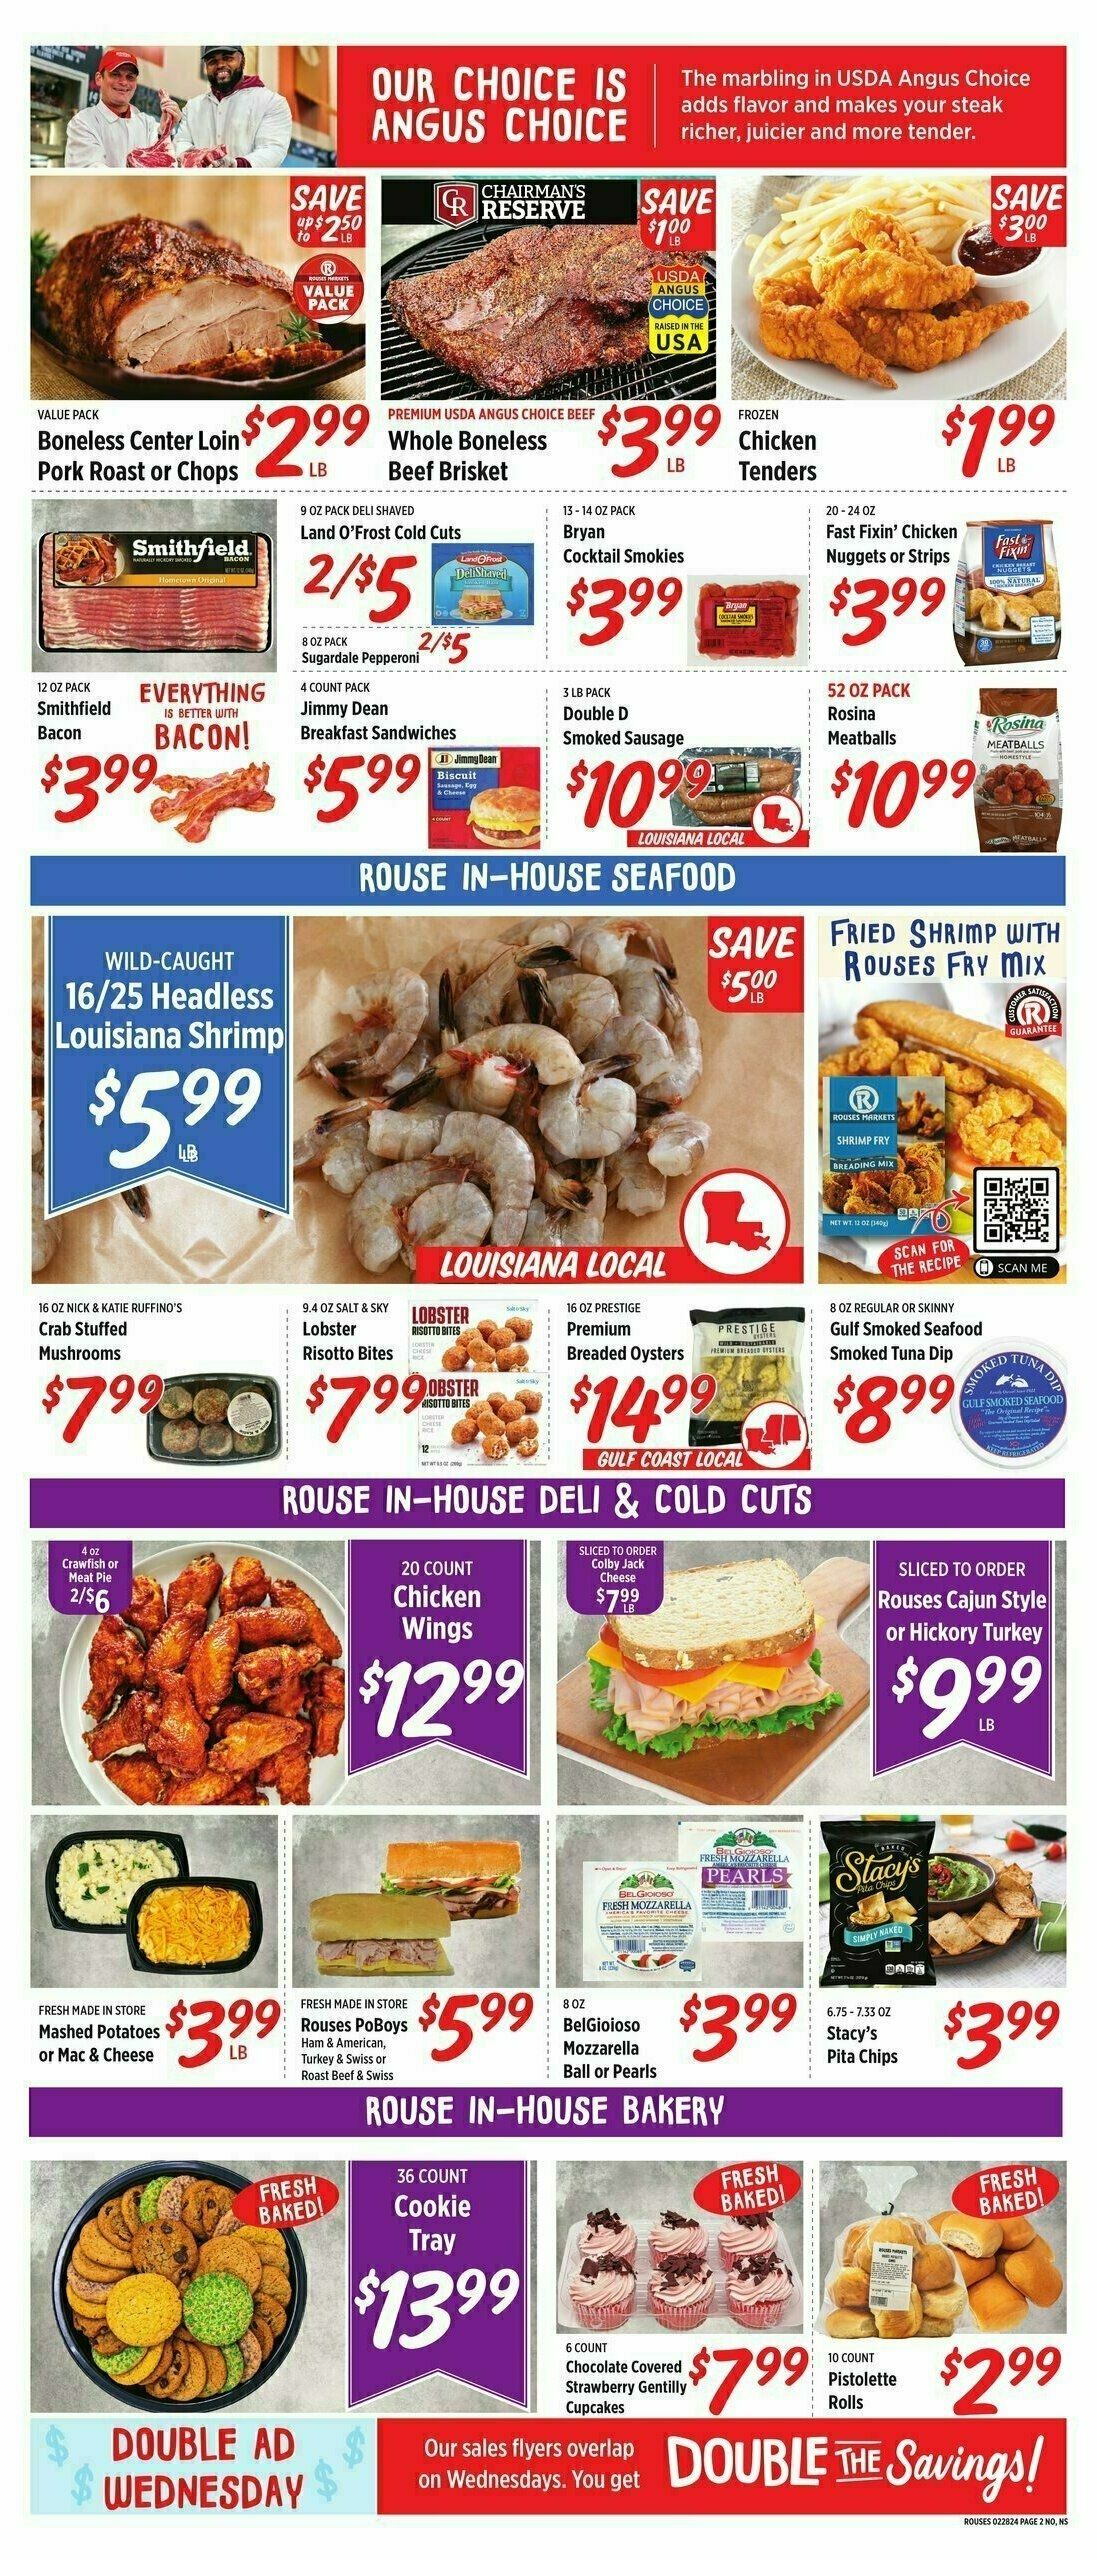 Rouses Markets Weekly Ad from February 28